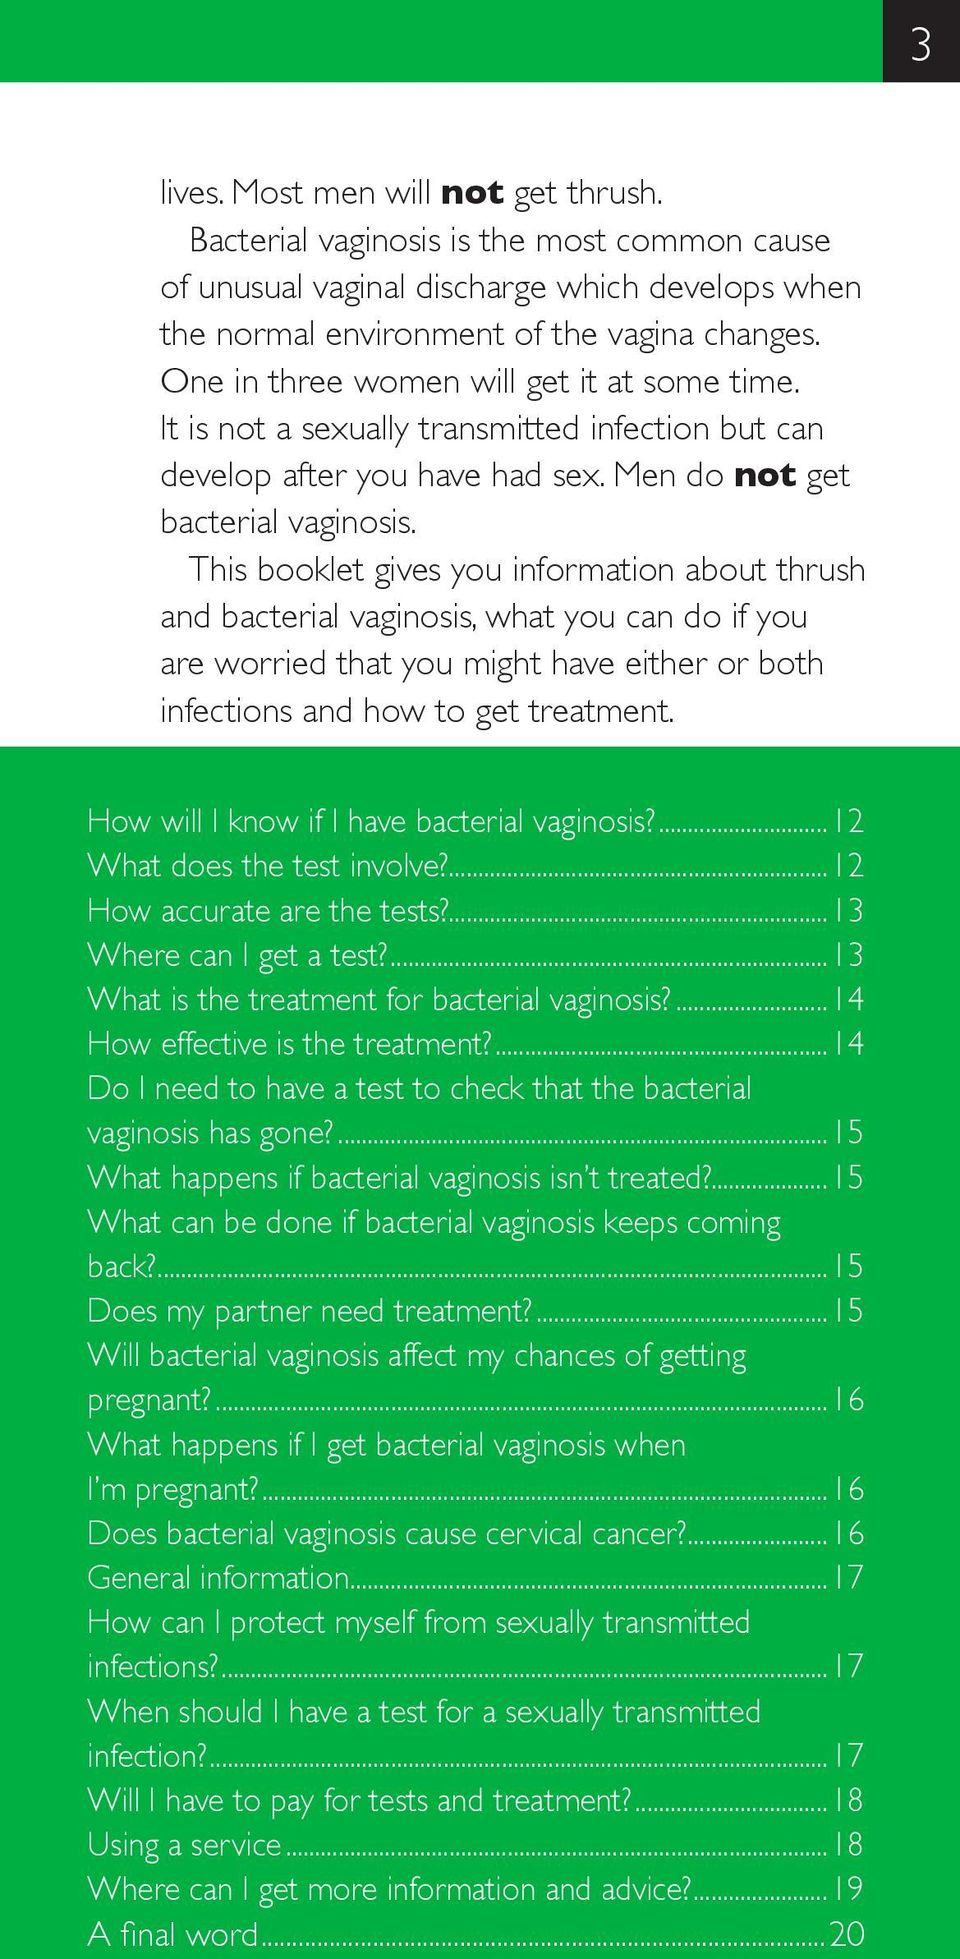 This booklet gives you information about thrush and bacterial vaginosis, what you can do if you are worried that you might have either or both infections and how to get treatment.